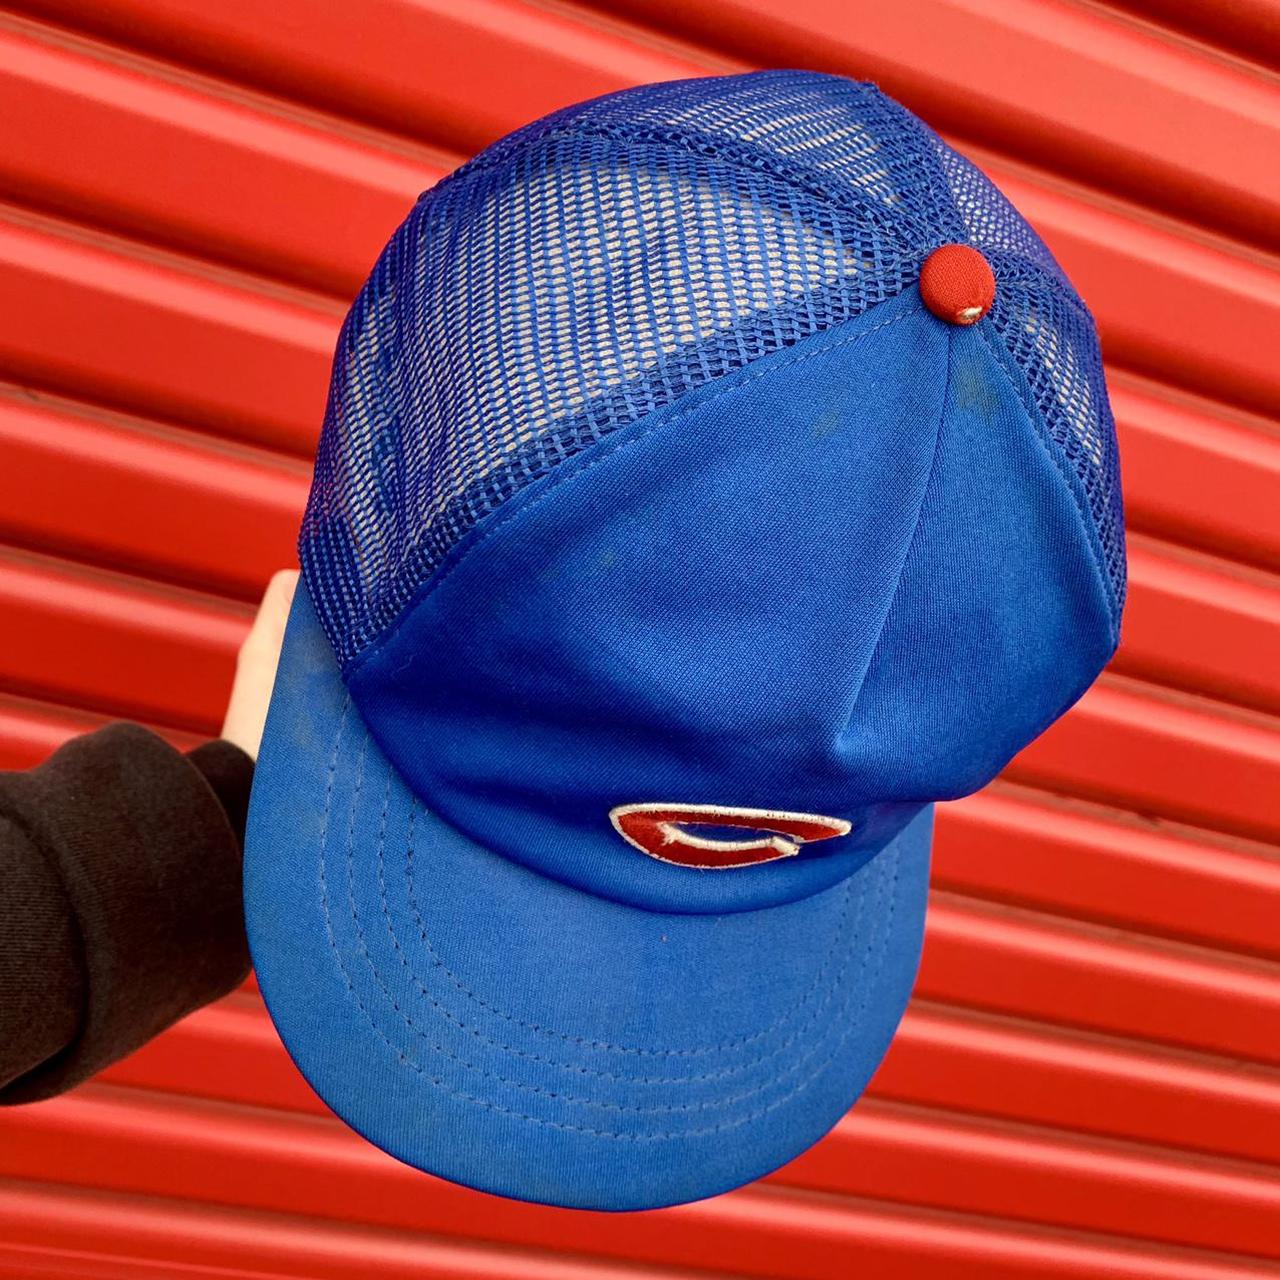 American Vintage Men's Red and Blue Hat (2)